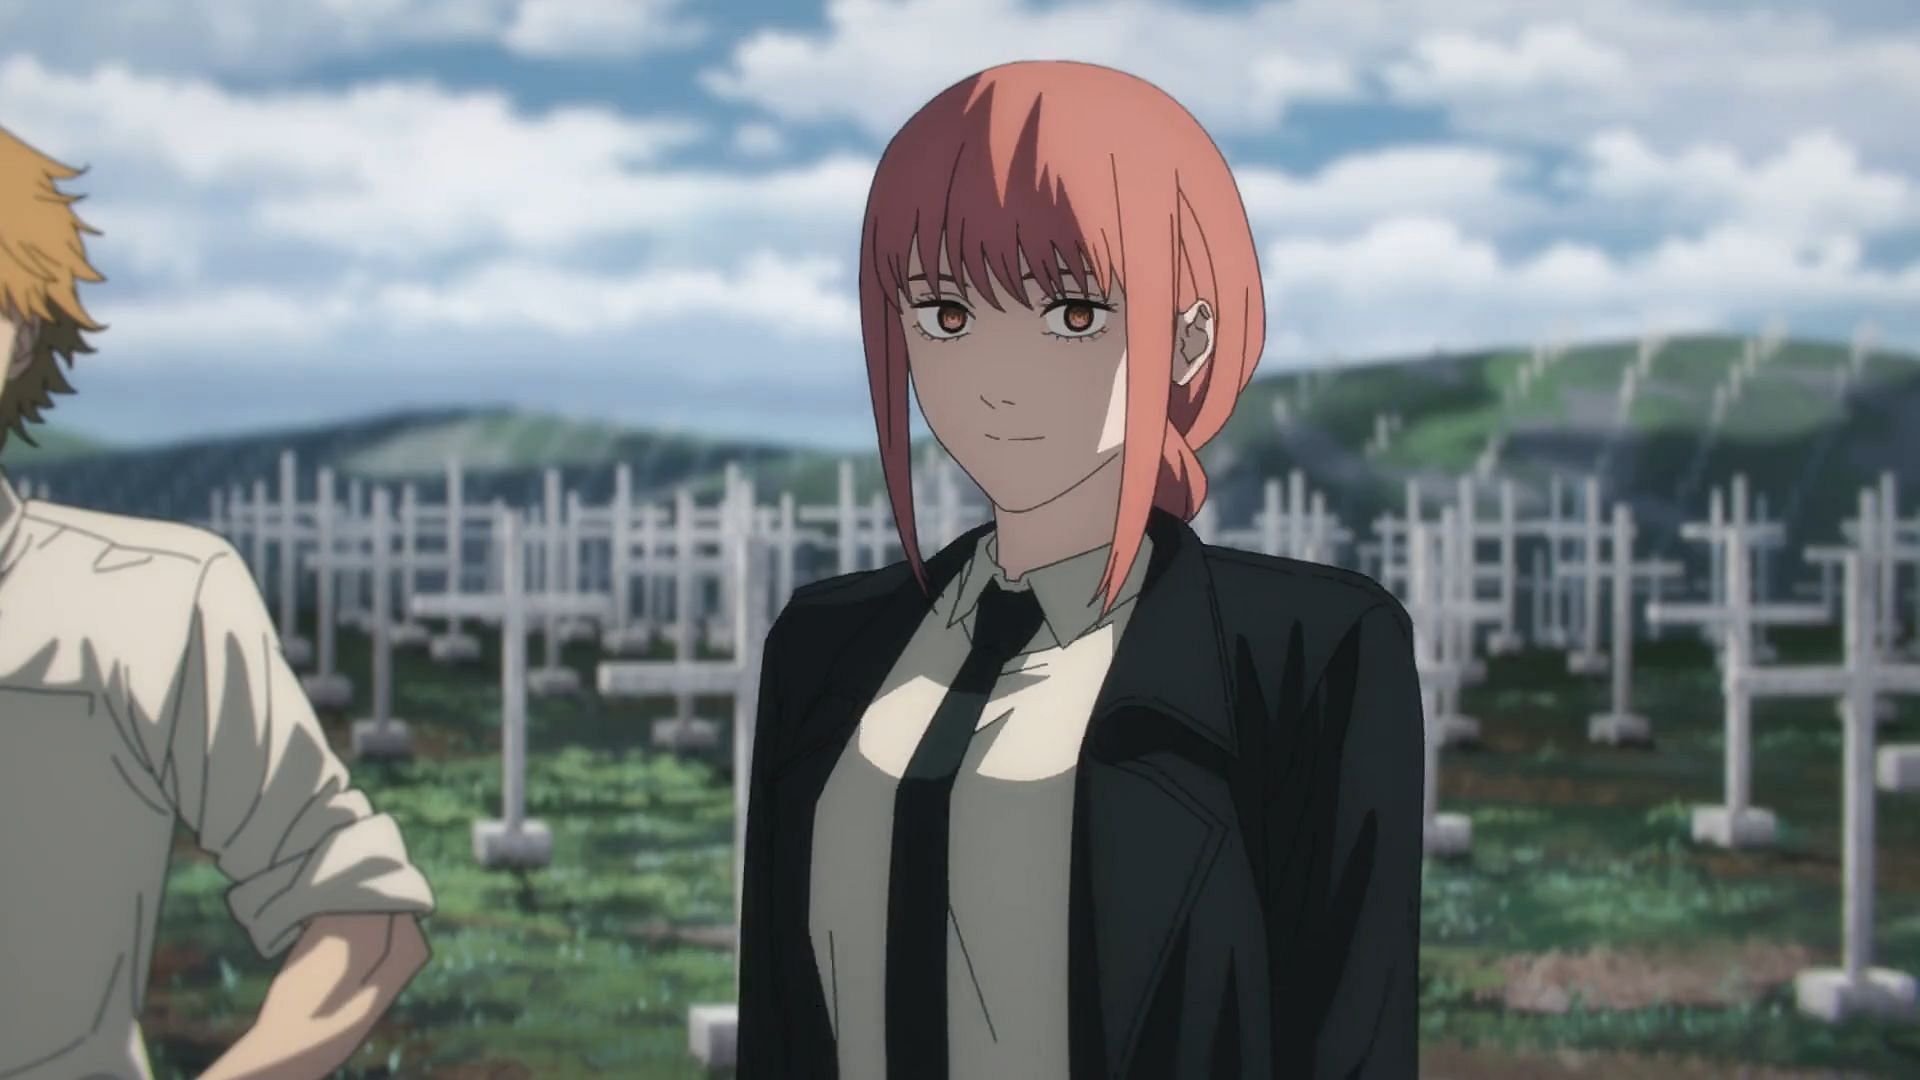 Makima as seen in the Chainsaw Man anime (Image via MAPPA)